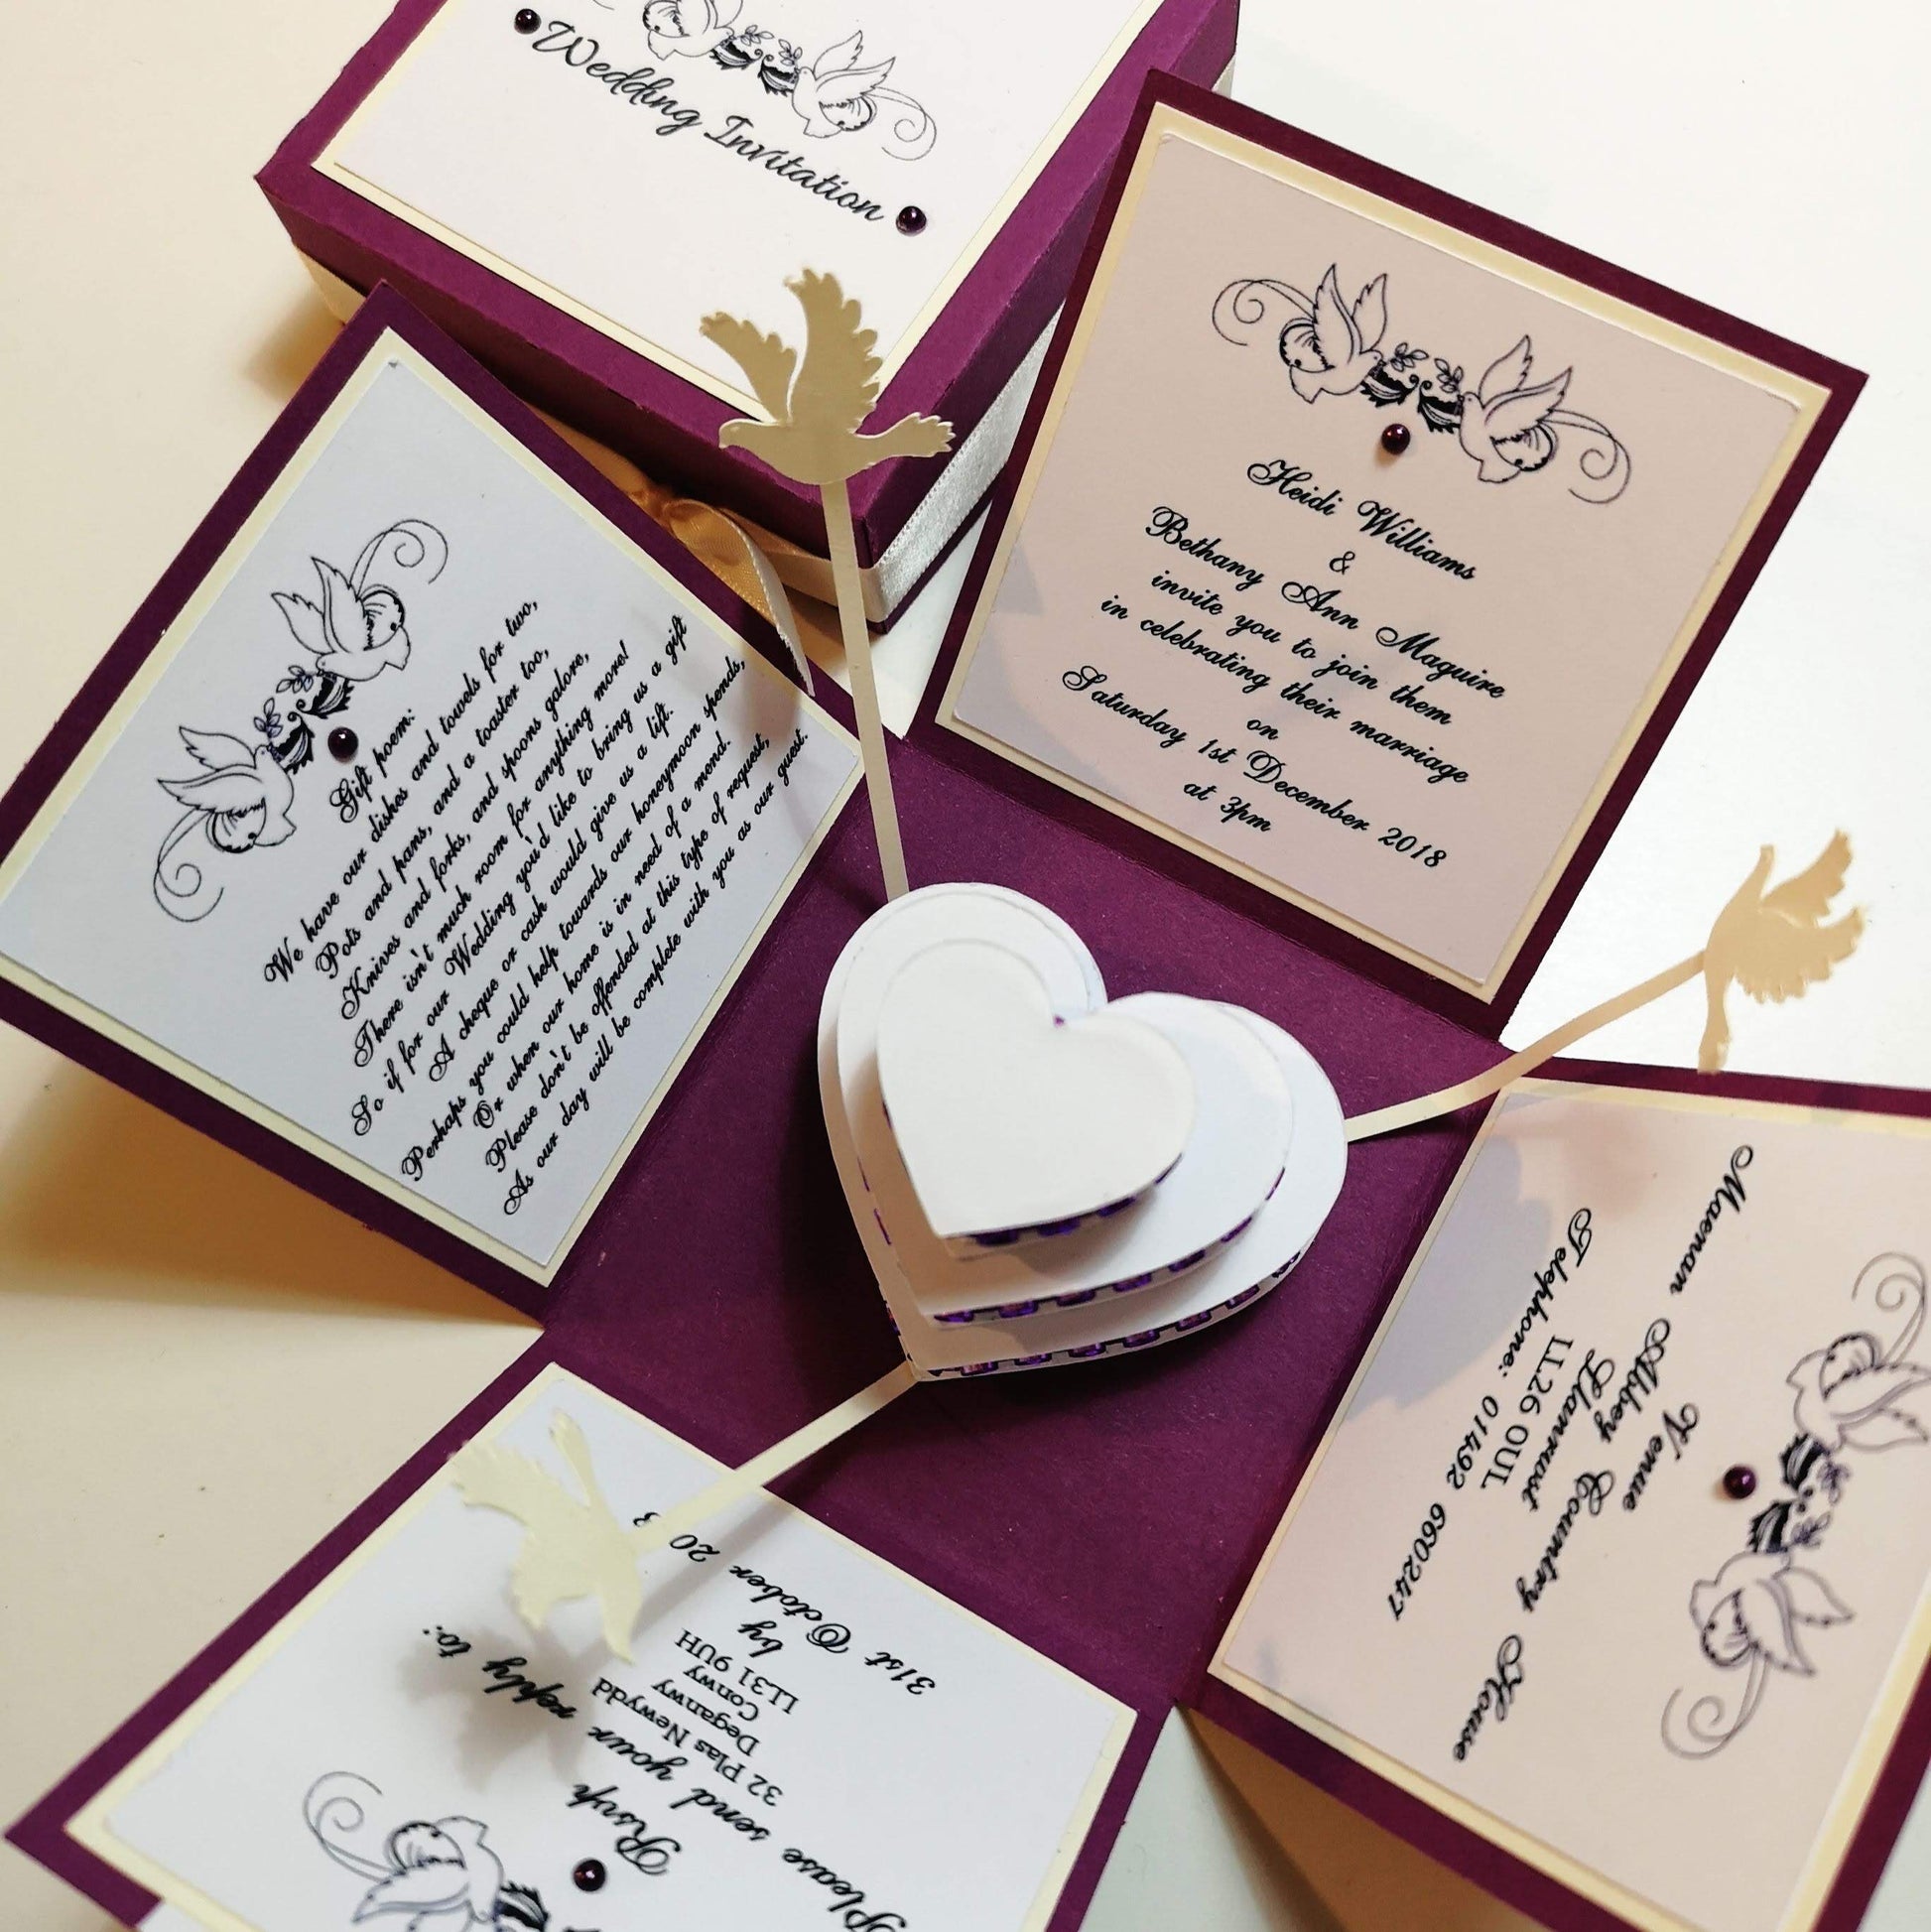 Hearts & Doves Range - In Purple & Cream. A totally unique 3'' Square Exploding Wedding Invitation Box featuring two fixed panels, One with Invitation details and the other with Venue details. There are also two waistcoat-styled pockets with pull-out panels containing Menu &amp; Menu Choices Cards plus RSVP Card &amp; Gift Poem. The centre of these boxes contains a three-tier Heart-shaped Wedding cake && floating doves